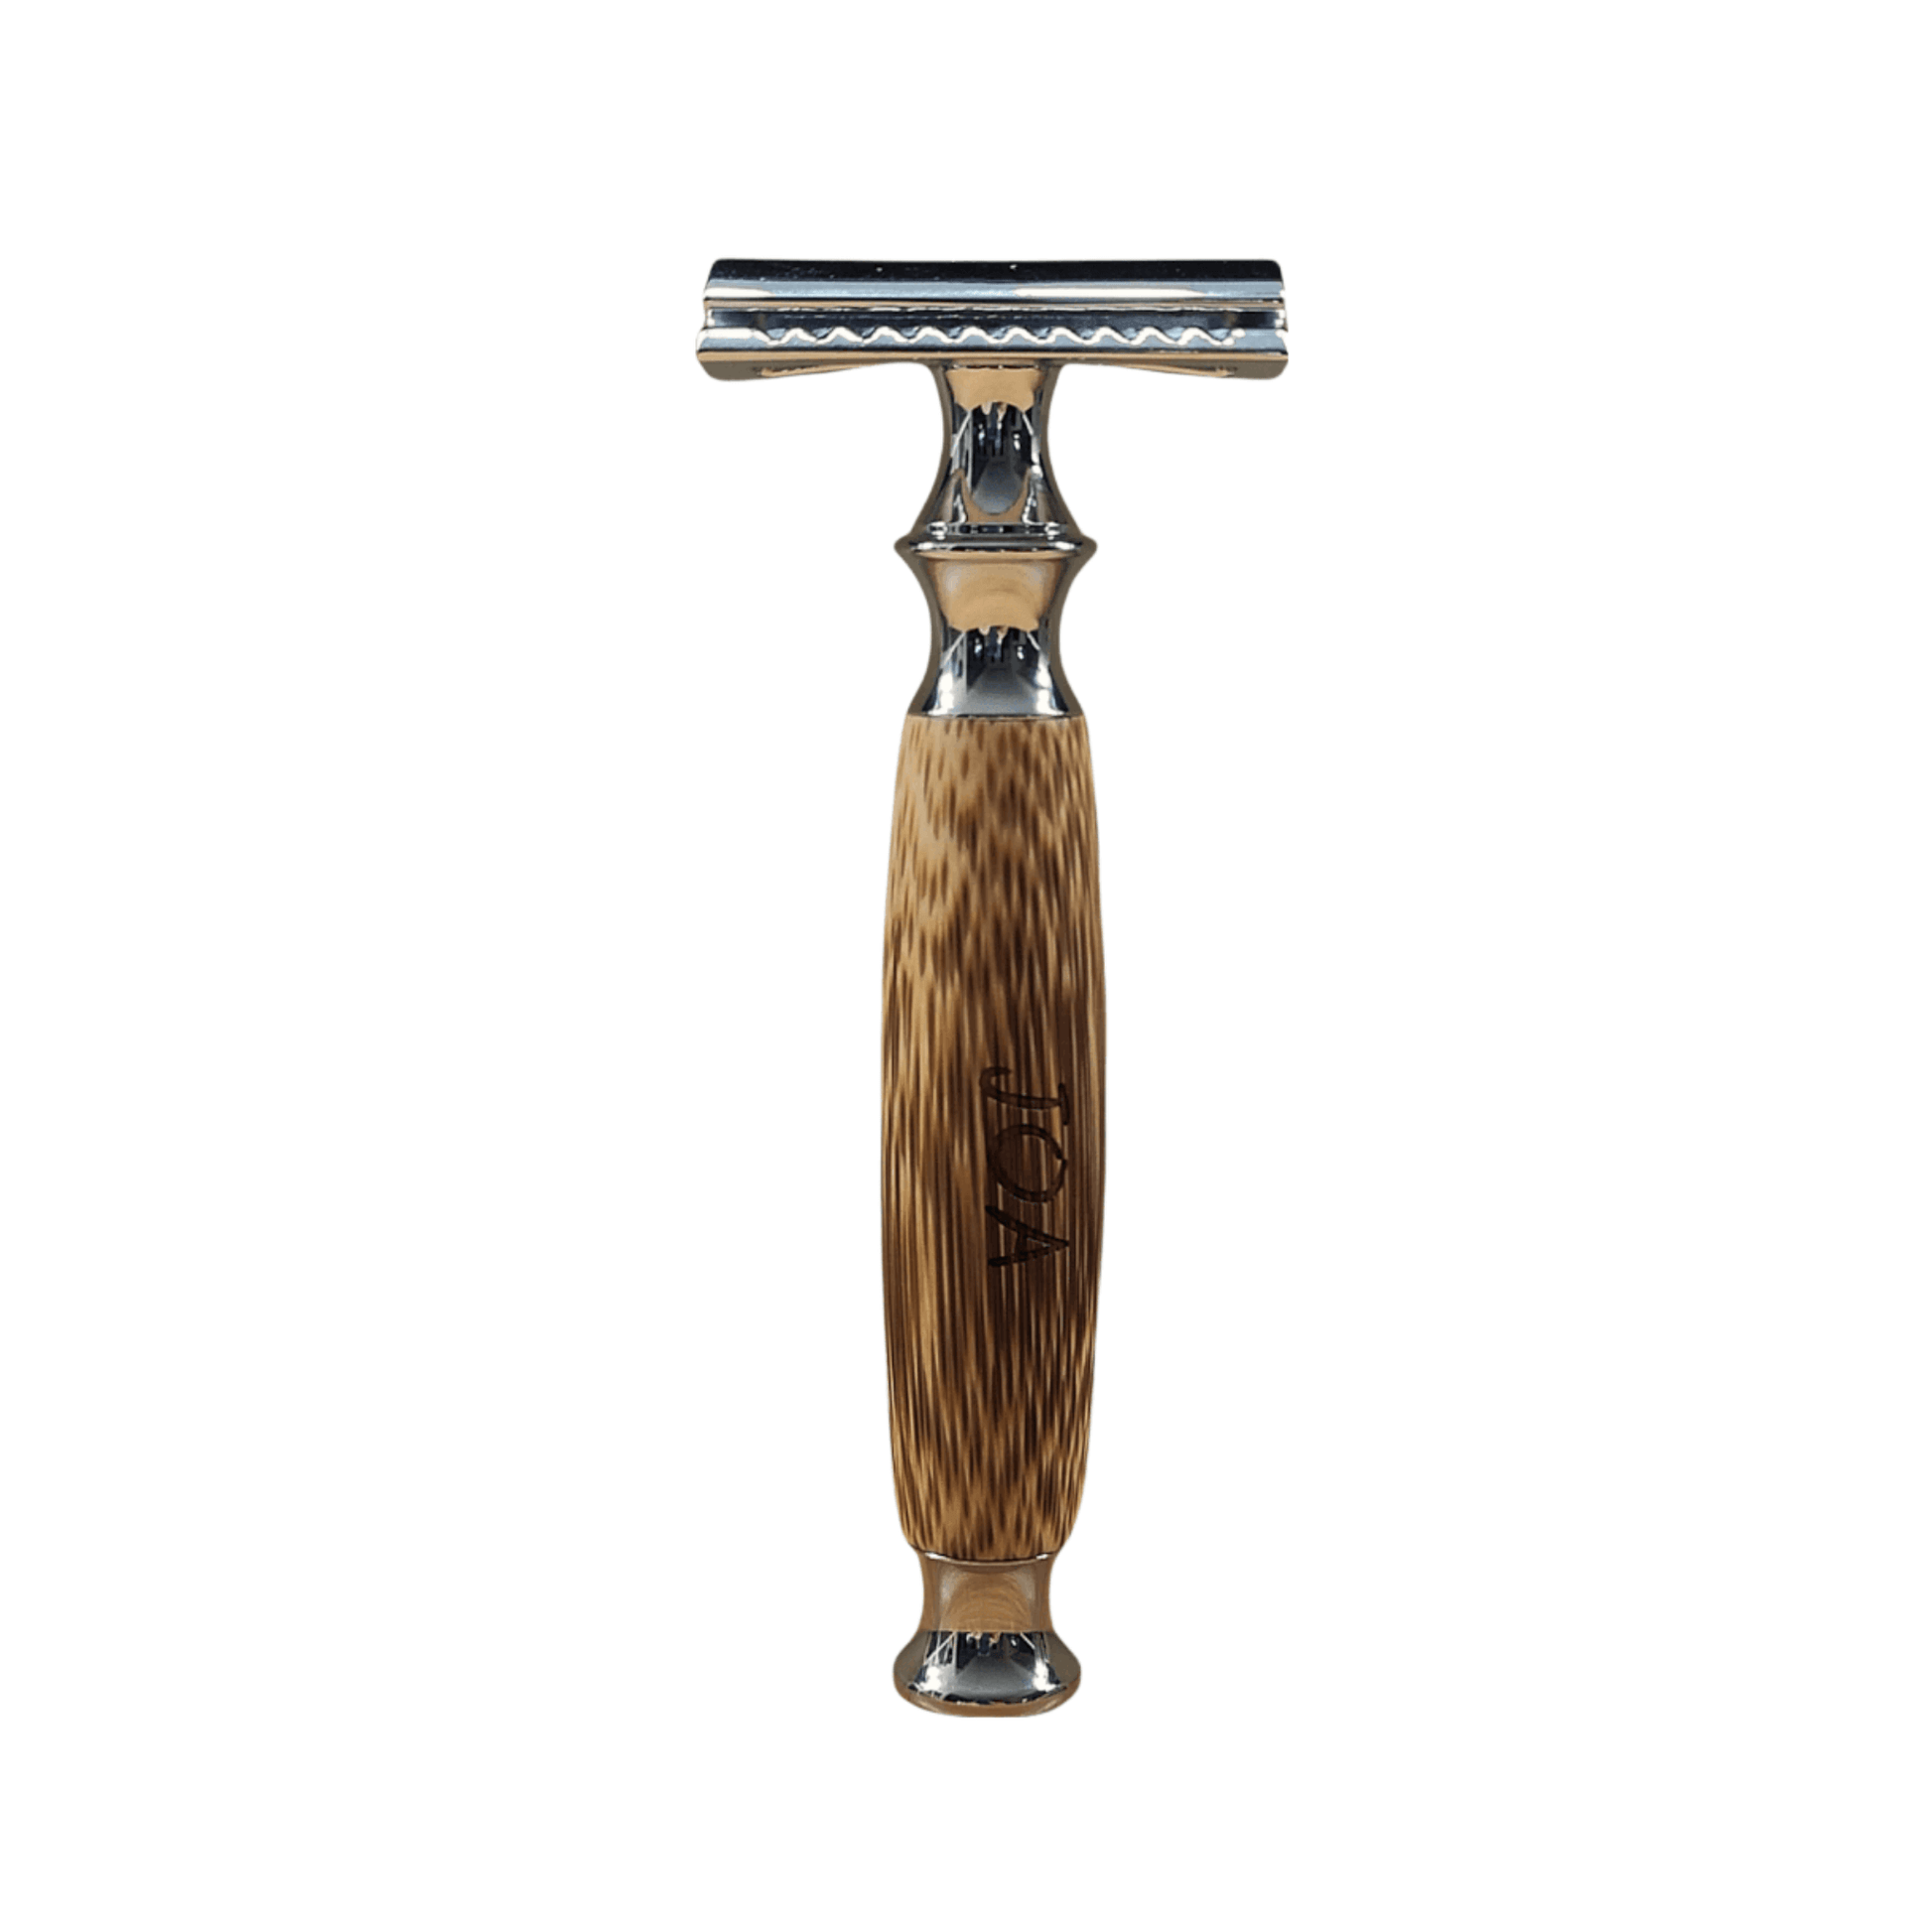 The Best Double Edge Bamboo Safety Razor, an eco-friendly, long-lasting and durable safety razor that every woman must have.